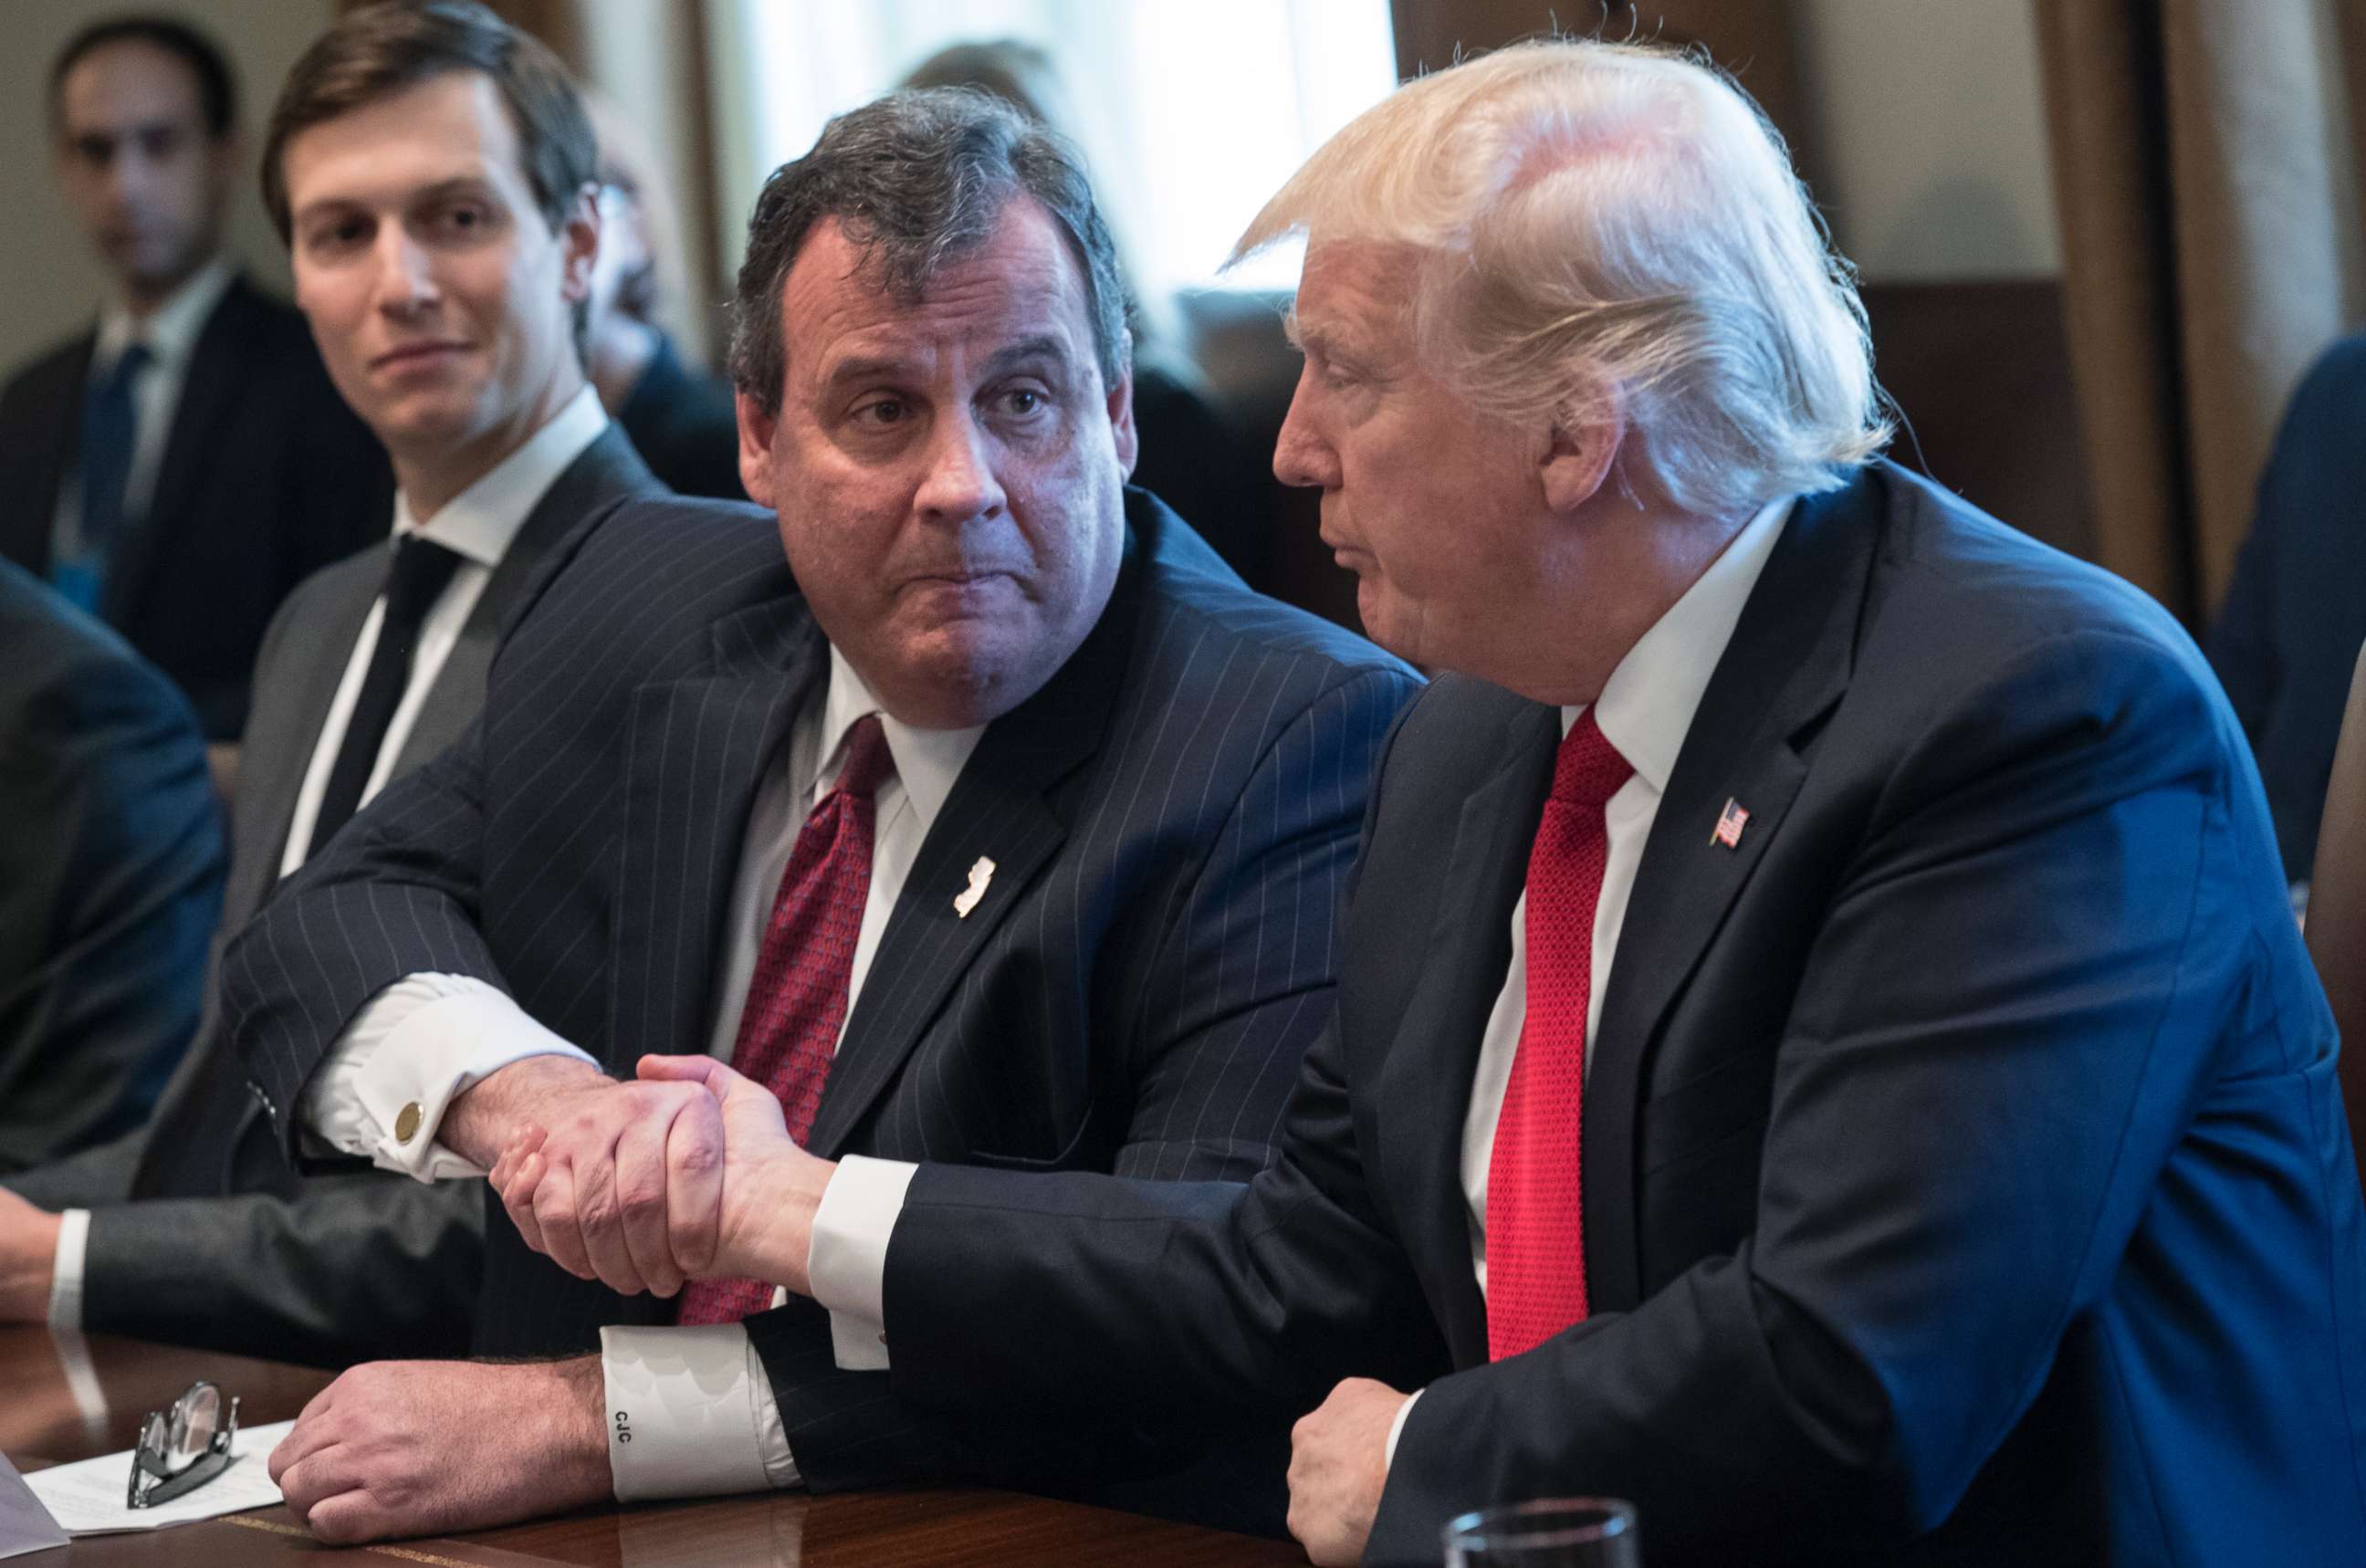 PHOTO: President Donald Trump, left, shakes hands with New Jersey Gov. Chris Christie at a panel discussion on an opioid and drug abuse in the Roosevelt Room of the White House March 29, 2017.